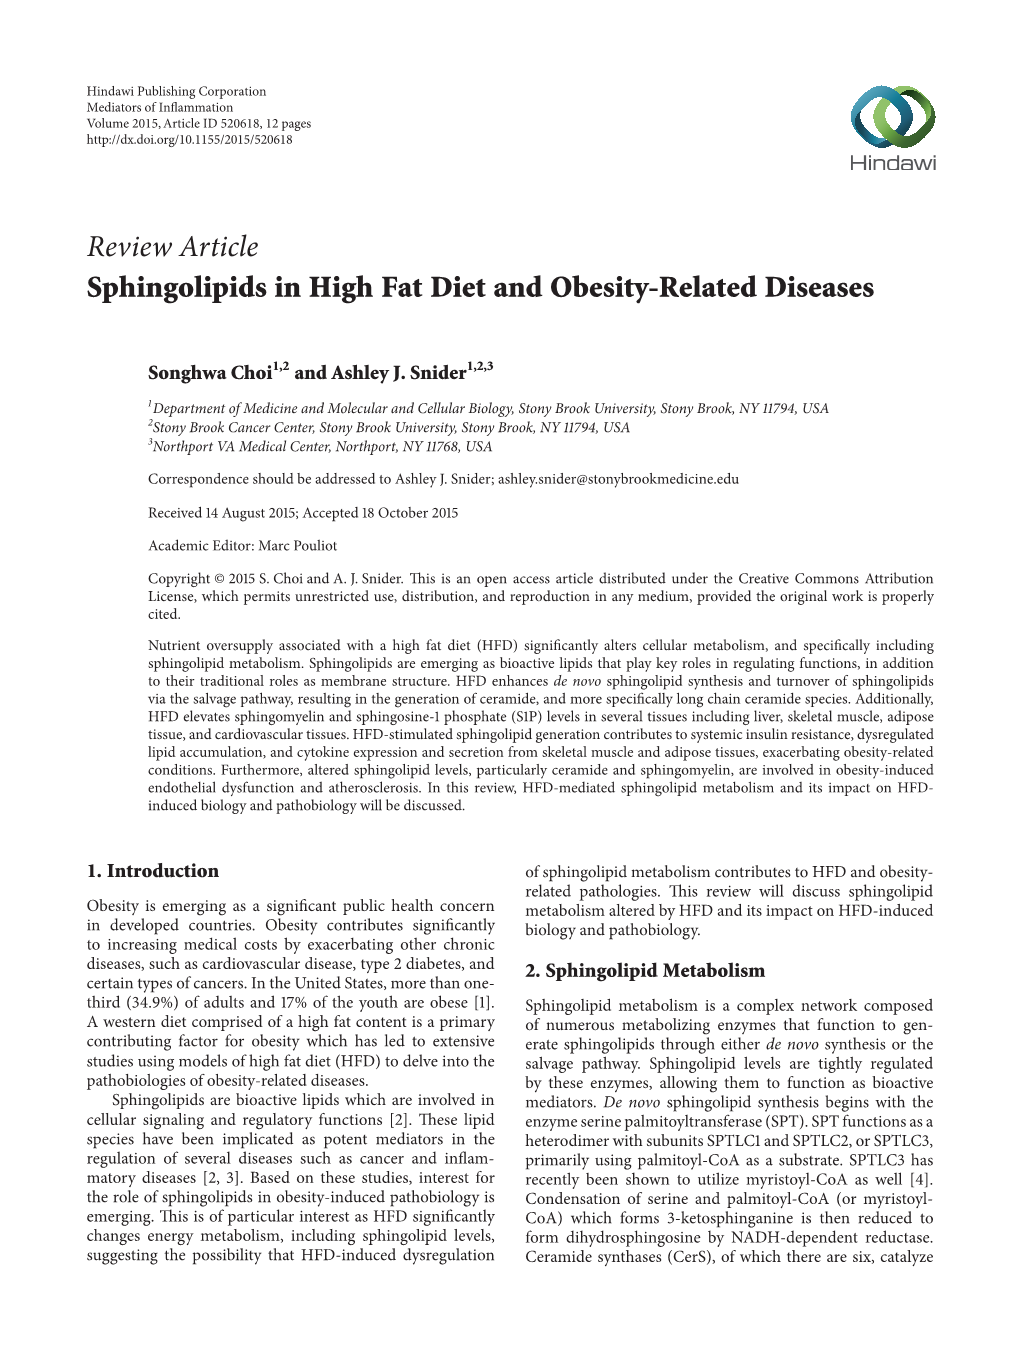 Sphingolipids in High Fat Diet and Obesity-Related Diseases